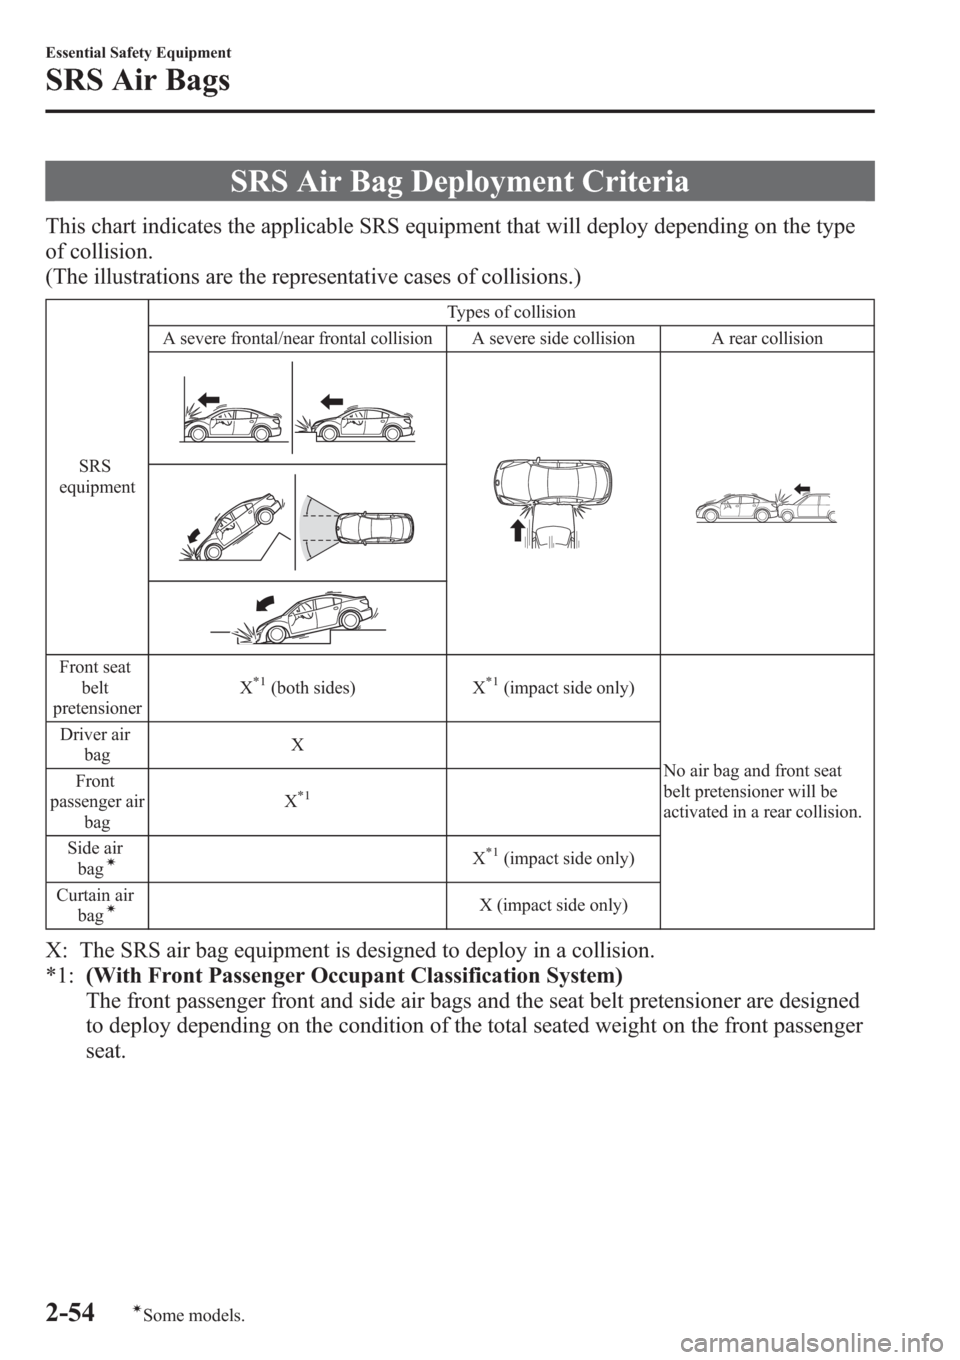 MAZDA MODEL 3 HATCHBACK 2013  Owners Manual (in English) SRS Air Bag Deployment Criteria
This chart indicates the applicable SRS equipment that will deploy depending on the type
of collision.
(The illustrations are the representative cases of collisions.)
S